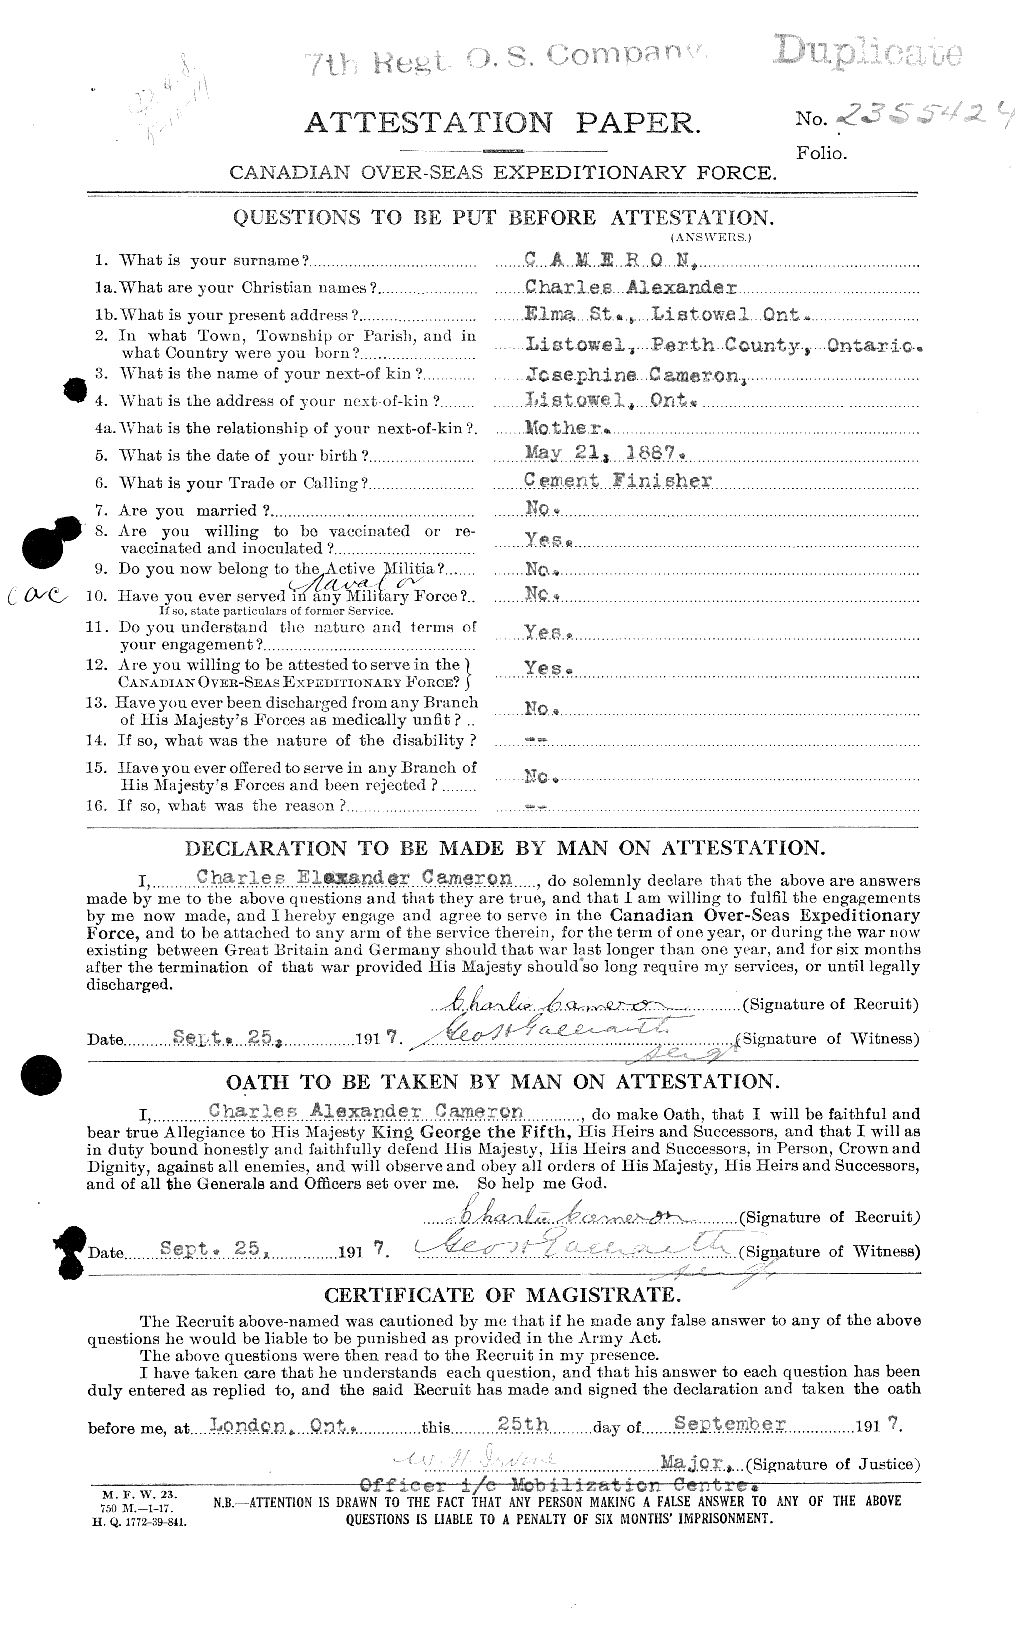 Personnel Records of the First World War - CEF 002602a